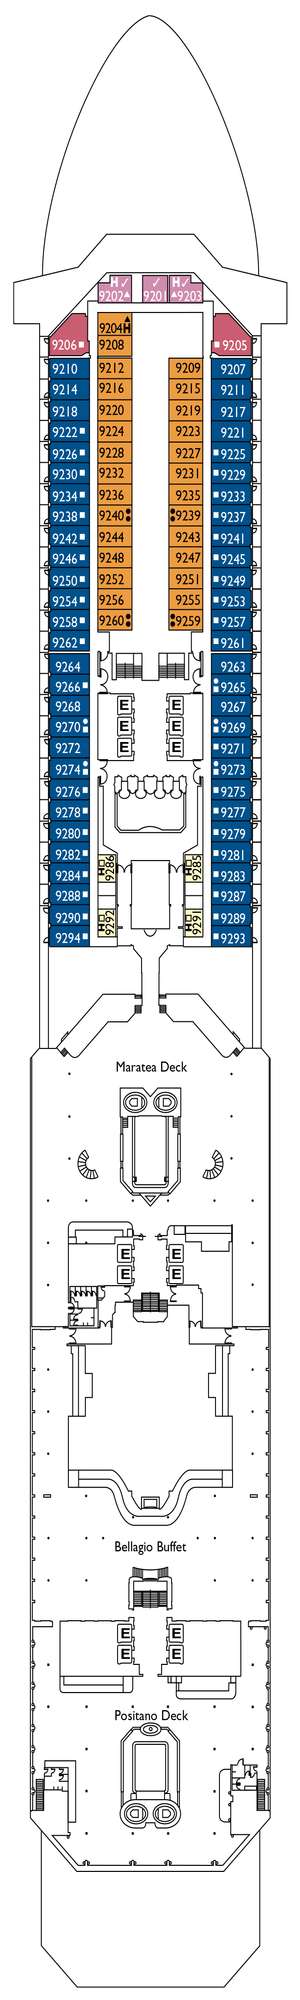 Deck plan for Costa Magica